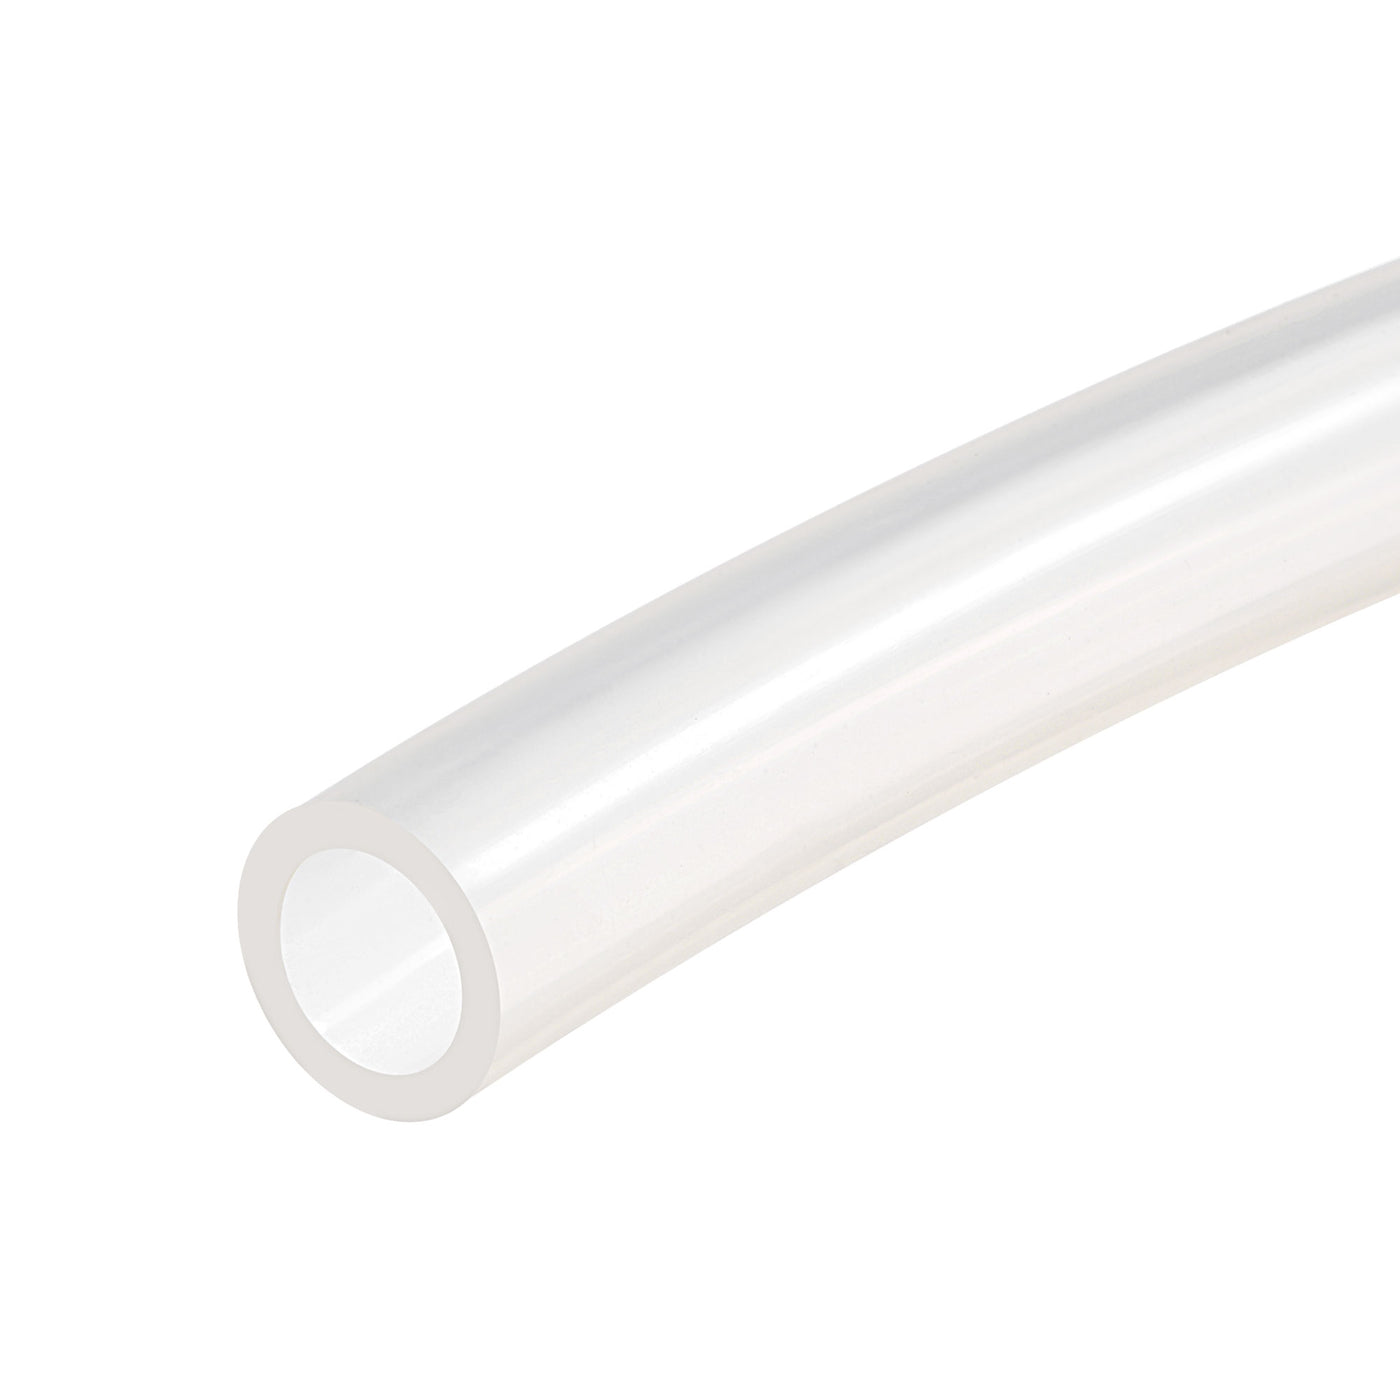 uxcell Uxcell PVC Clear Vinyl Tubing, 13mm(1/2-inch) ID 18mm OD 6m Plastic Pipe Air Water Hose